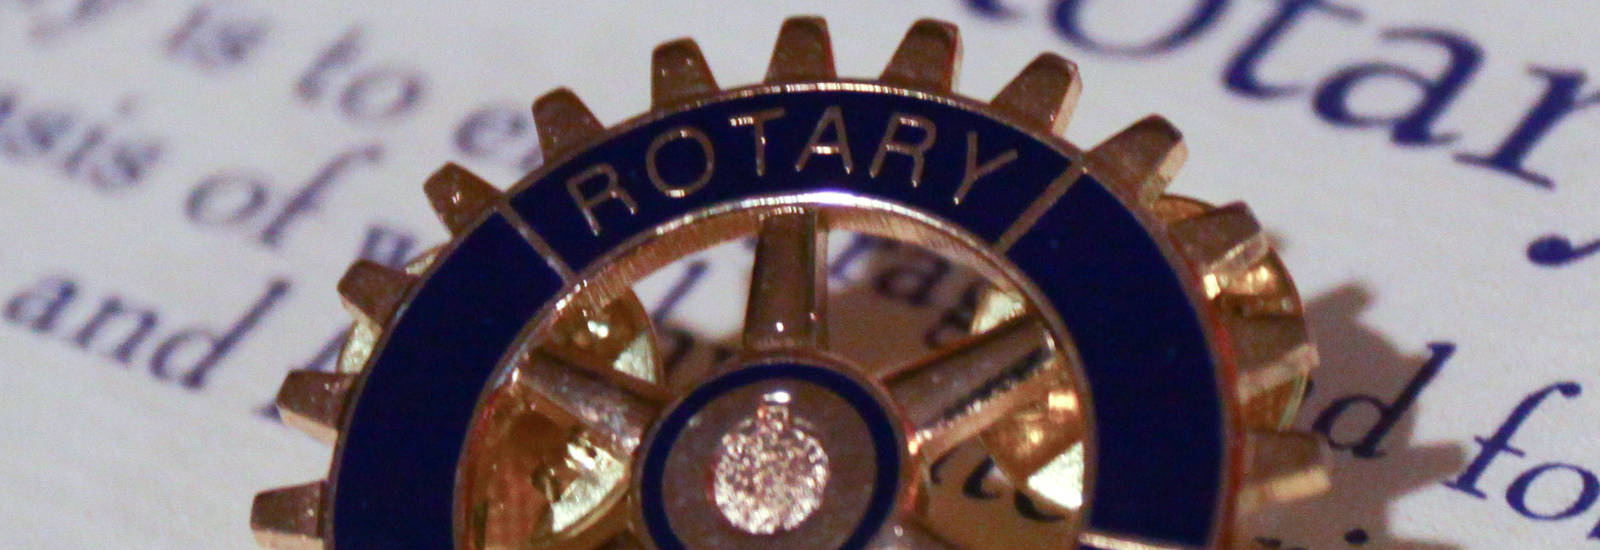 Rotary Club of Granville is part of Rotary International